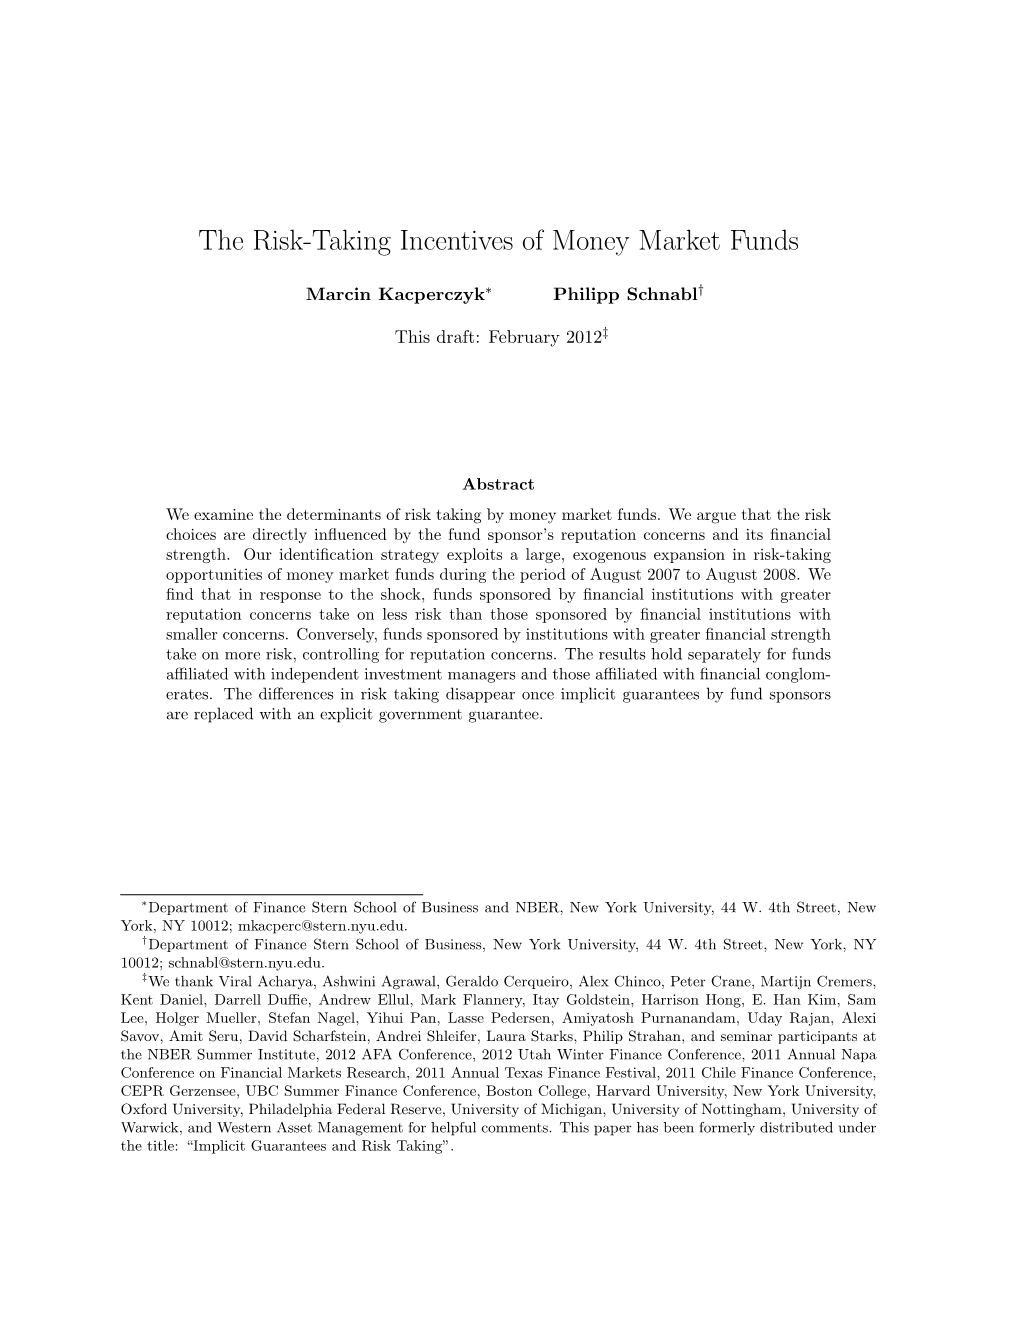 The Risk-Taking Incentives of Money Market Funds